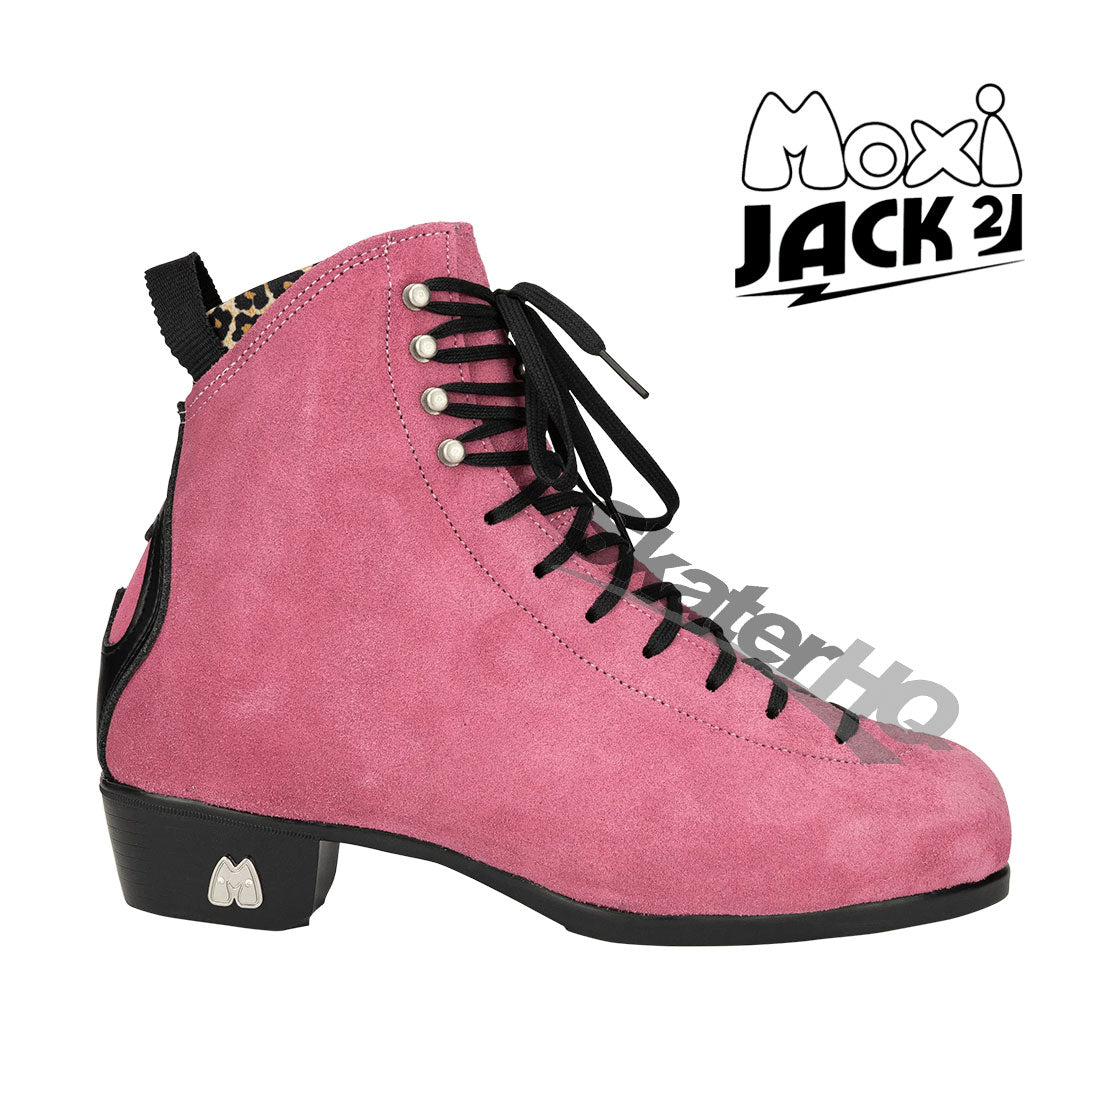 Moxi Jack 2 Boot - Special - Strawberry Roller Skate Boots